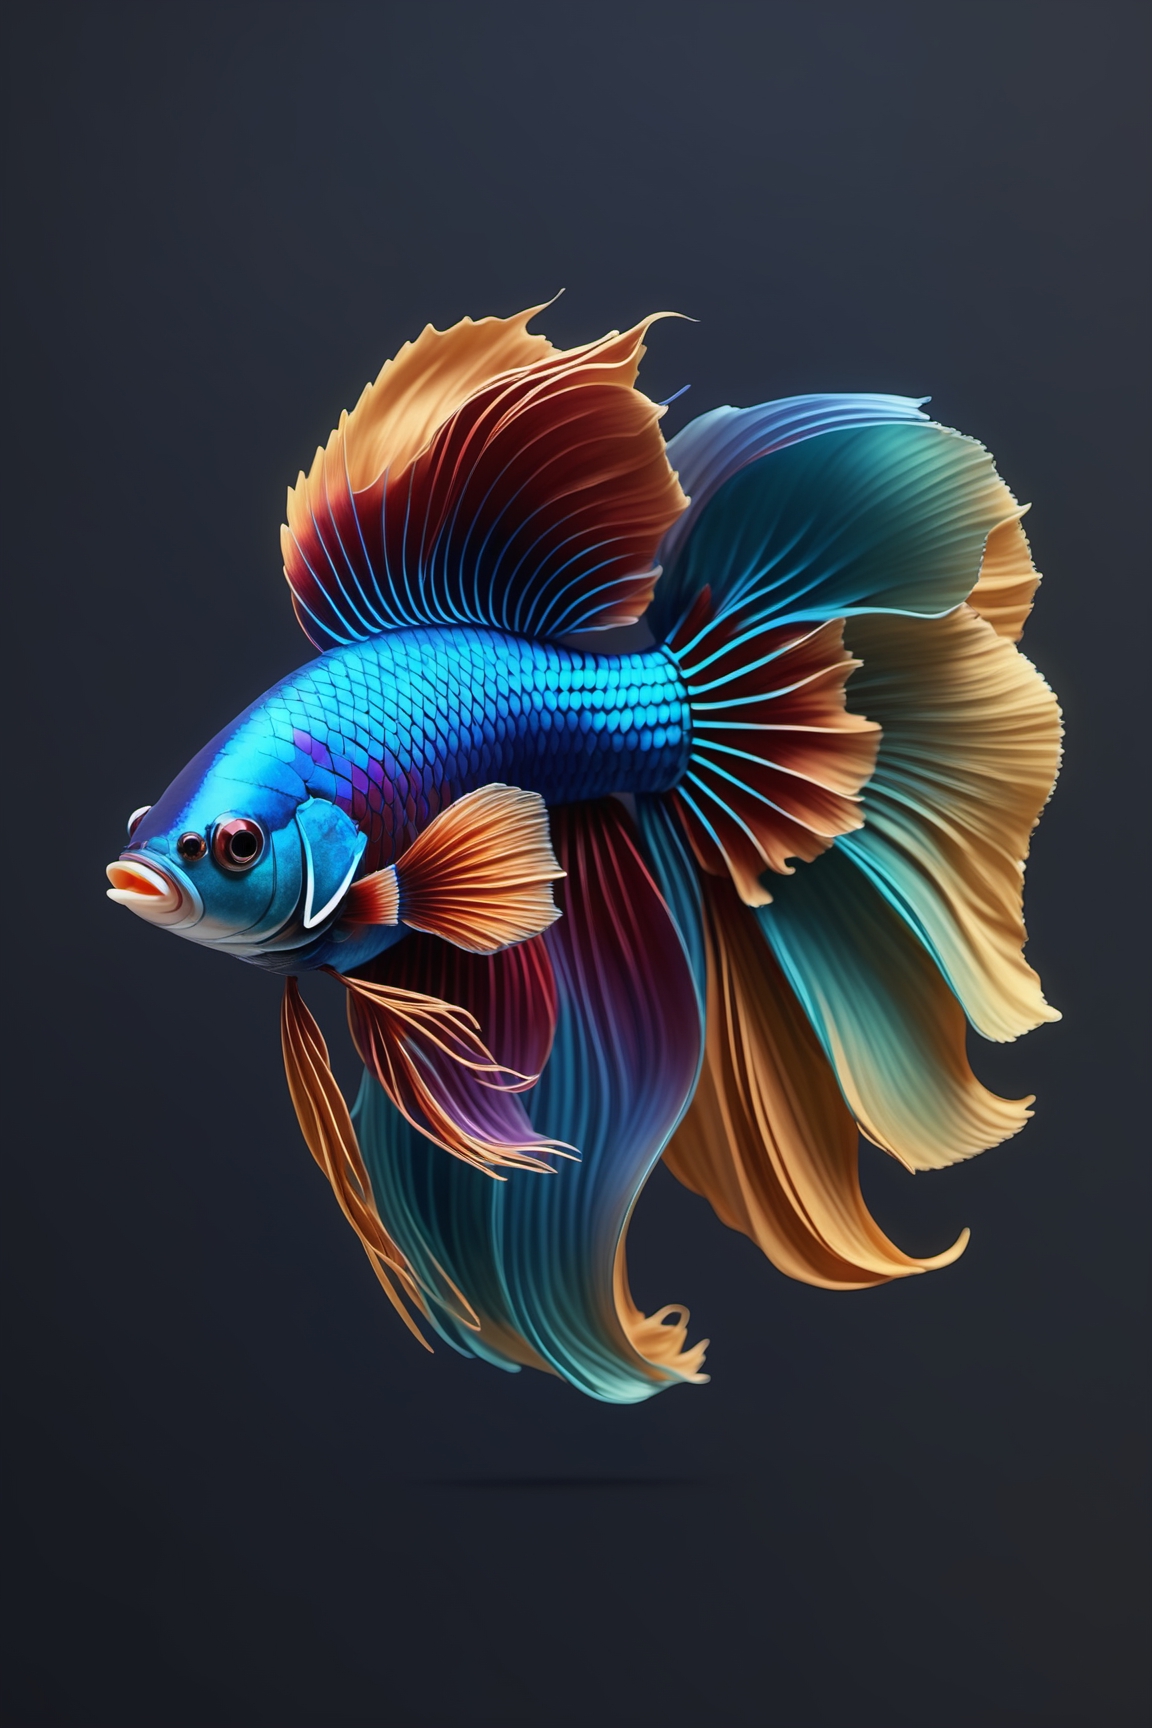 100+ Betta Fish Pictures | Download Free Images on Unsplash